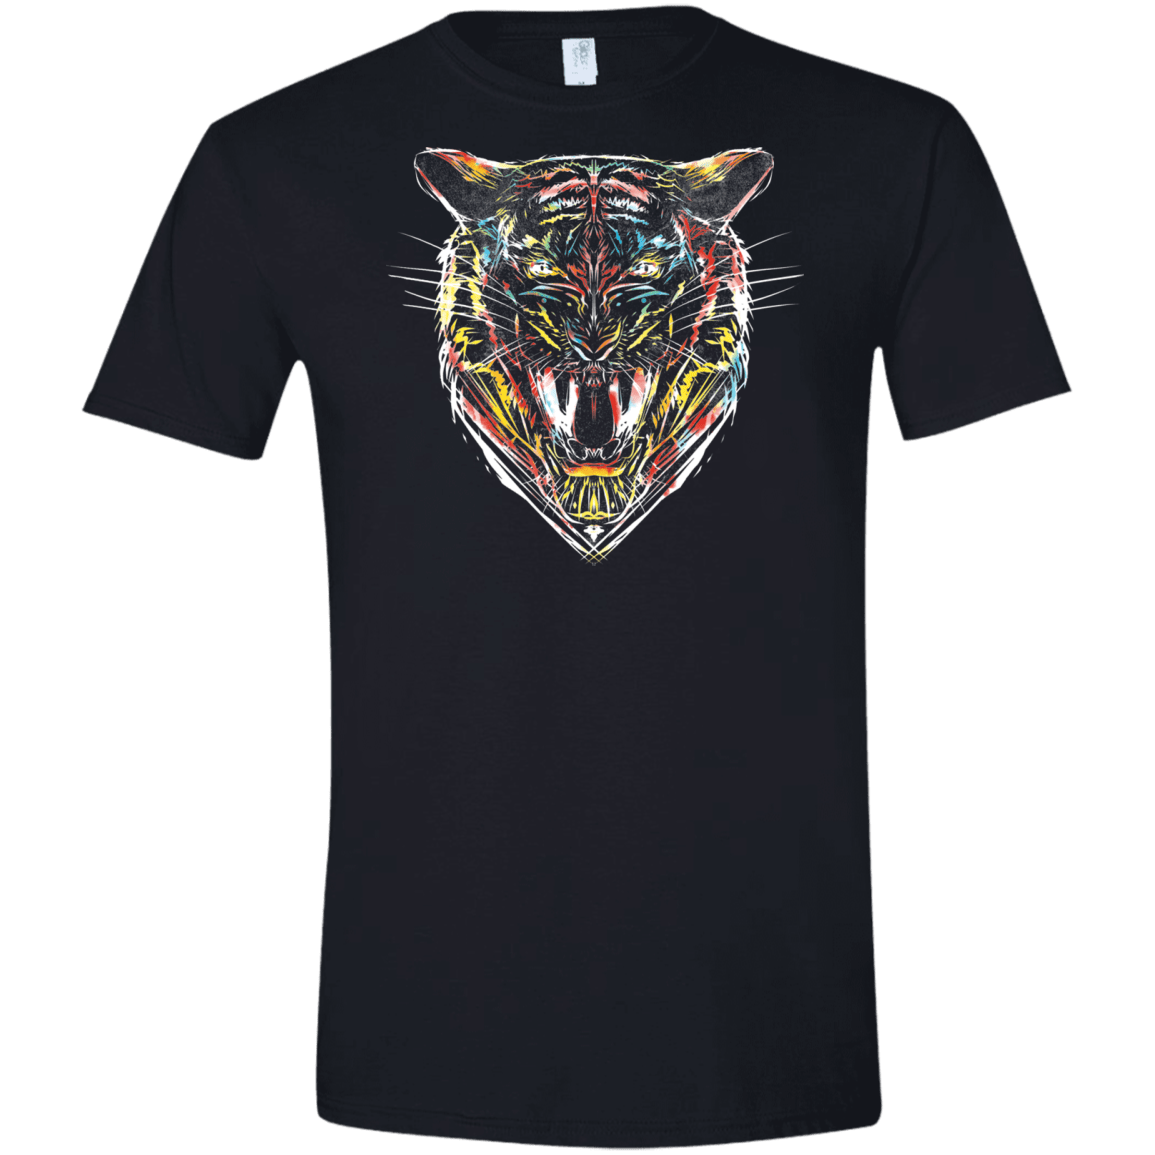 Stencil Tiger Men's Semi-Fitted Softstyle